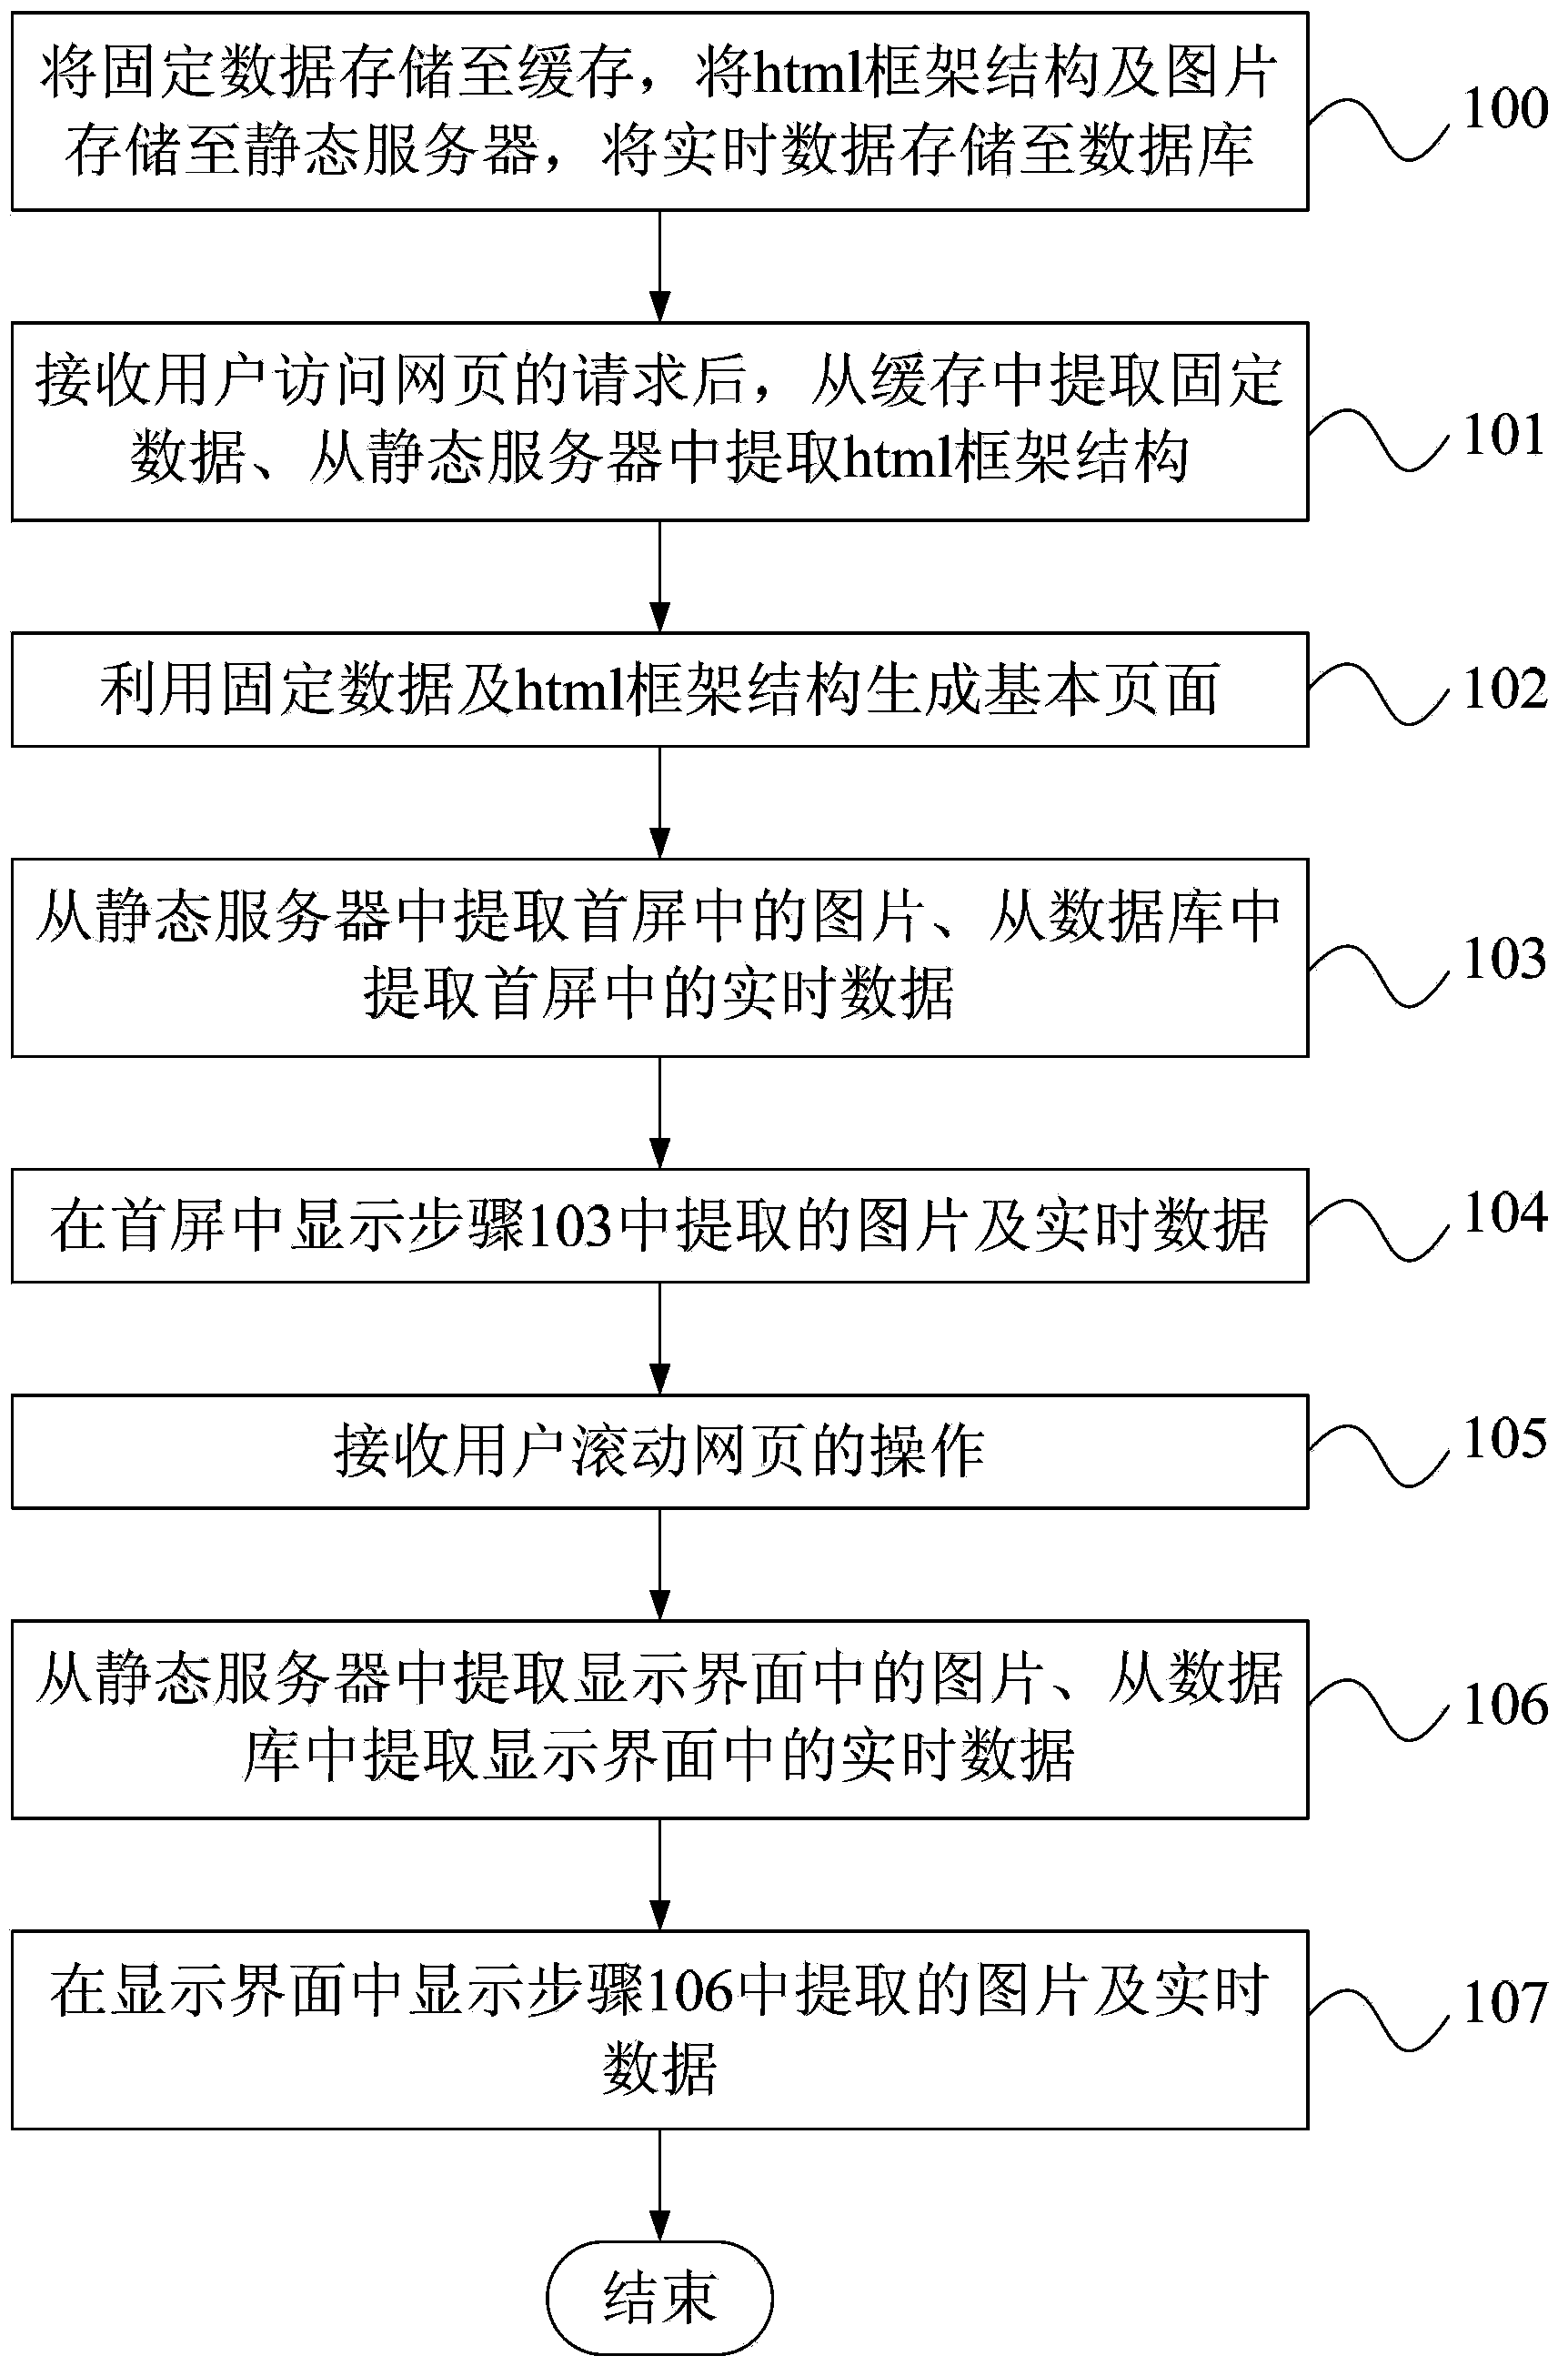 Webpage display system and method